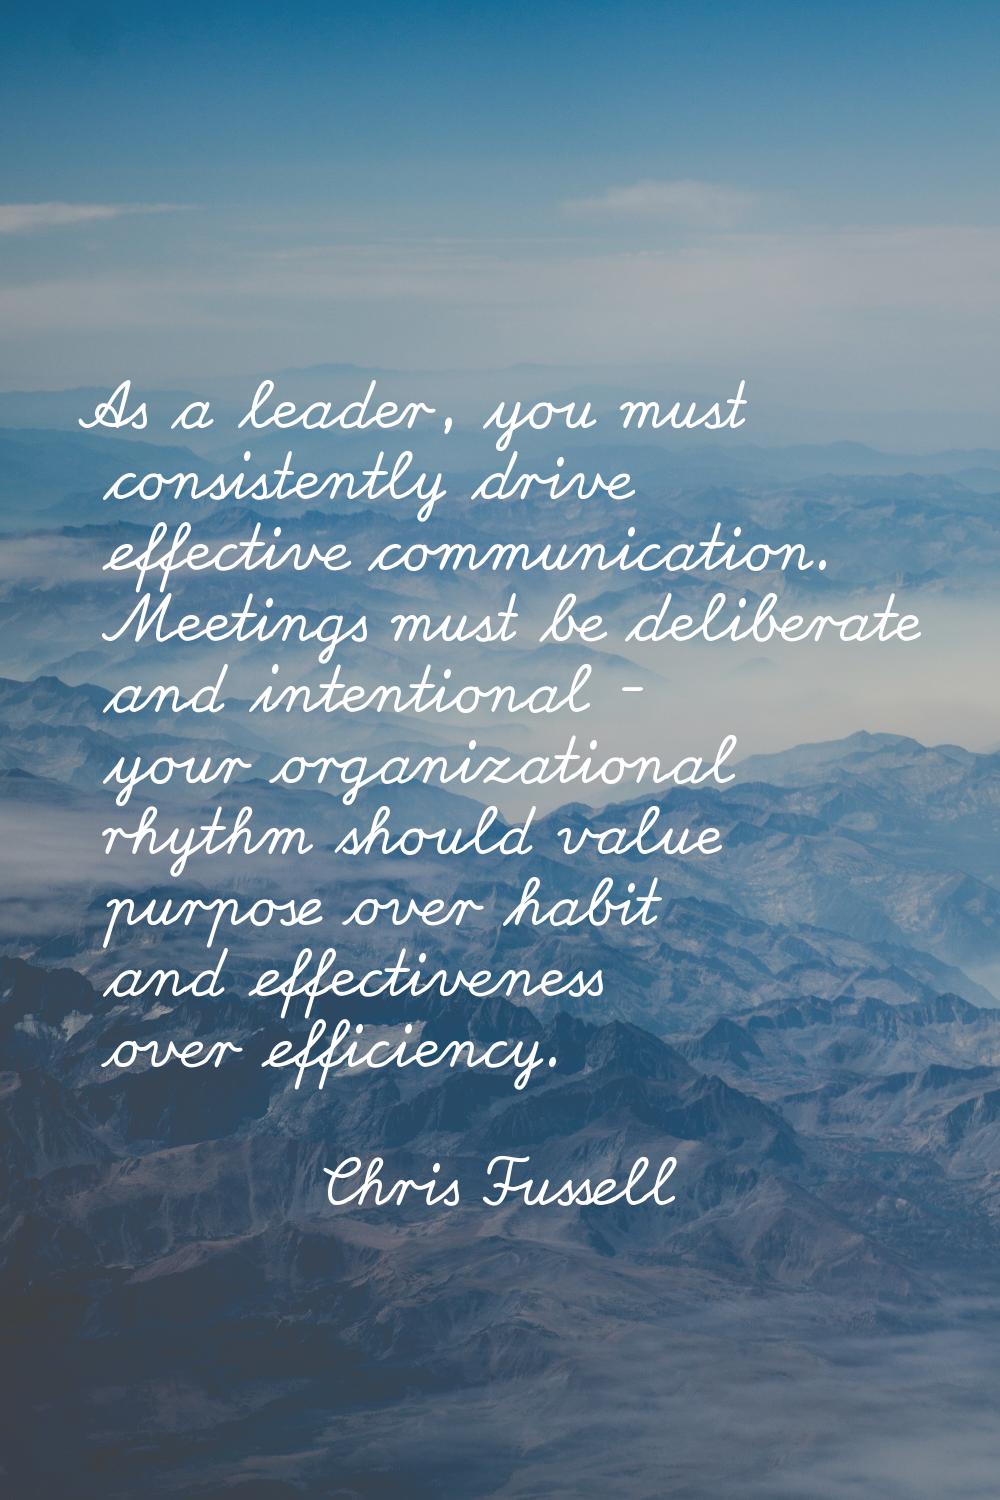 As a leader, you must consistently drive effective communication. Meetings must be deliberate and i